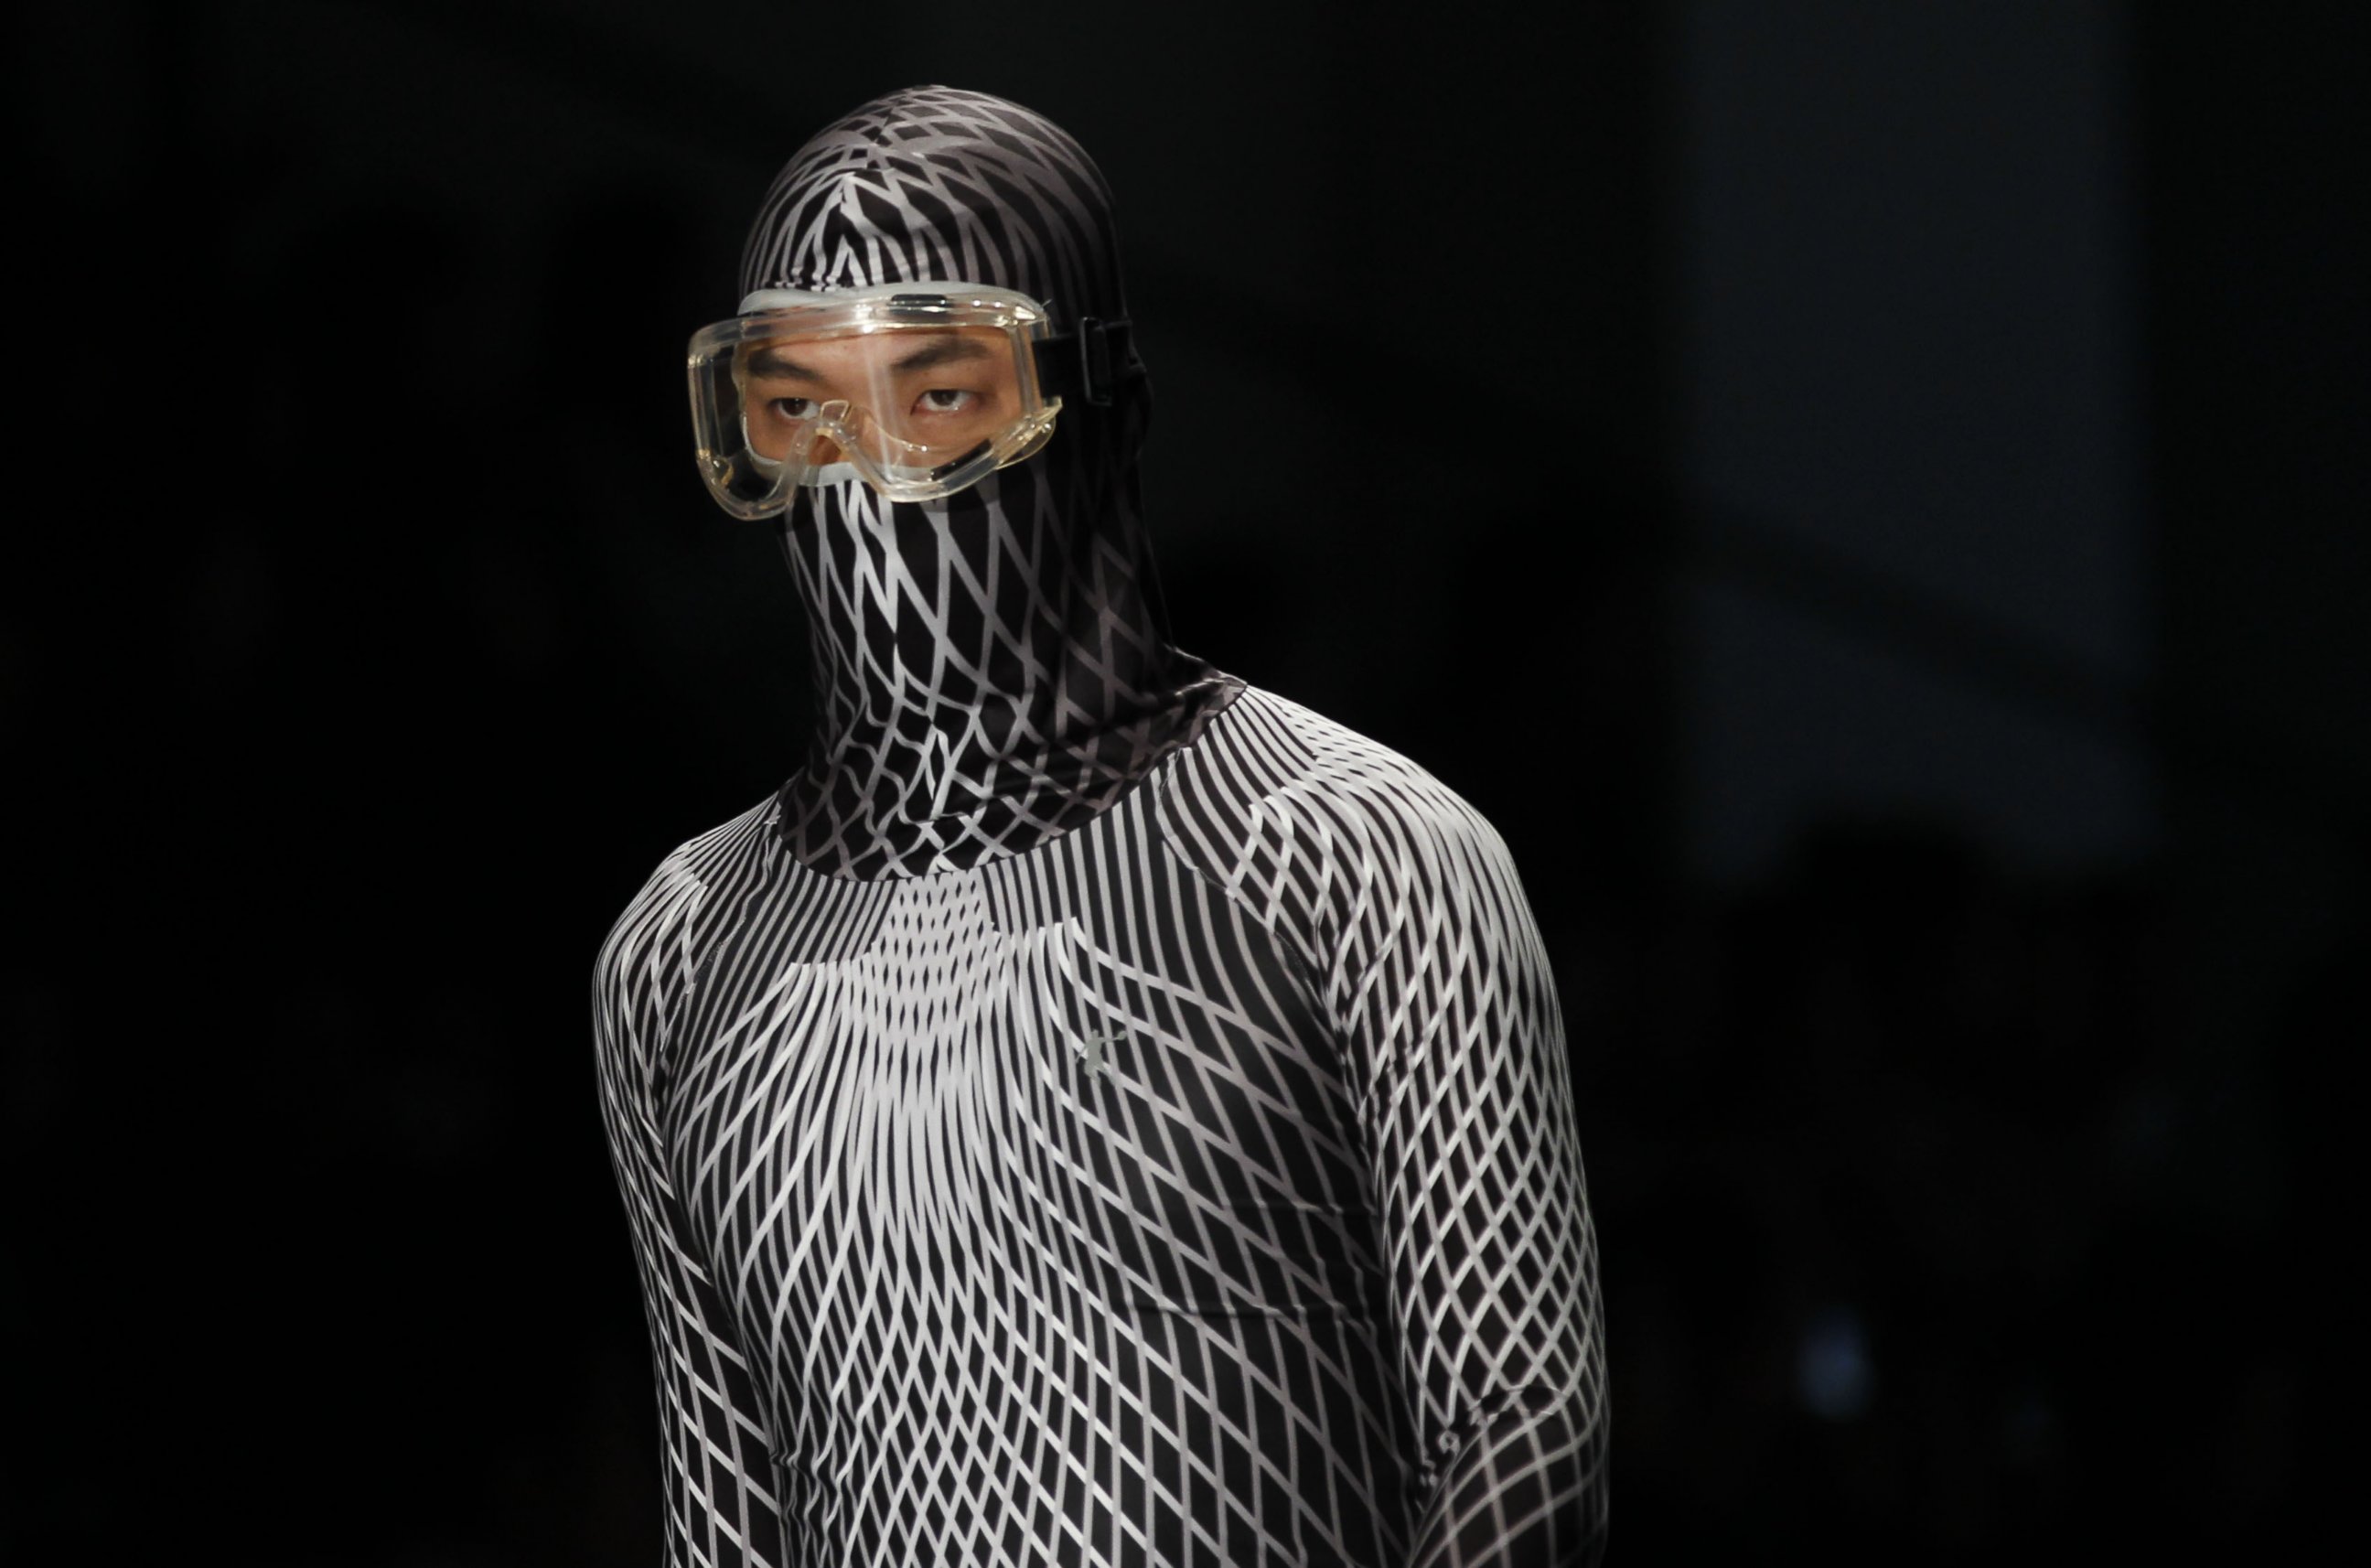 PHOTO: A facial mask appears at the China international fashion week, Oct. 28, 2014, in Beijing.